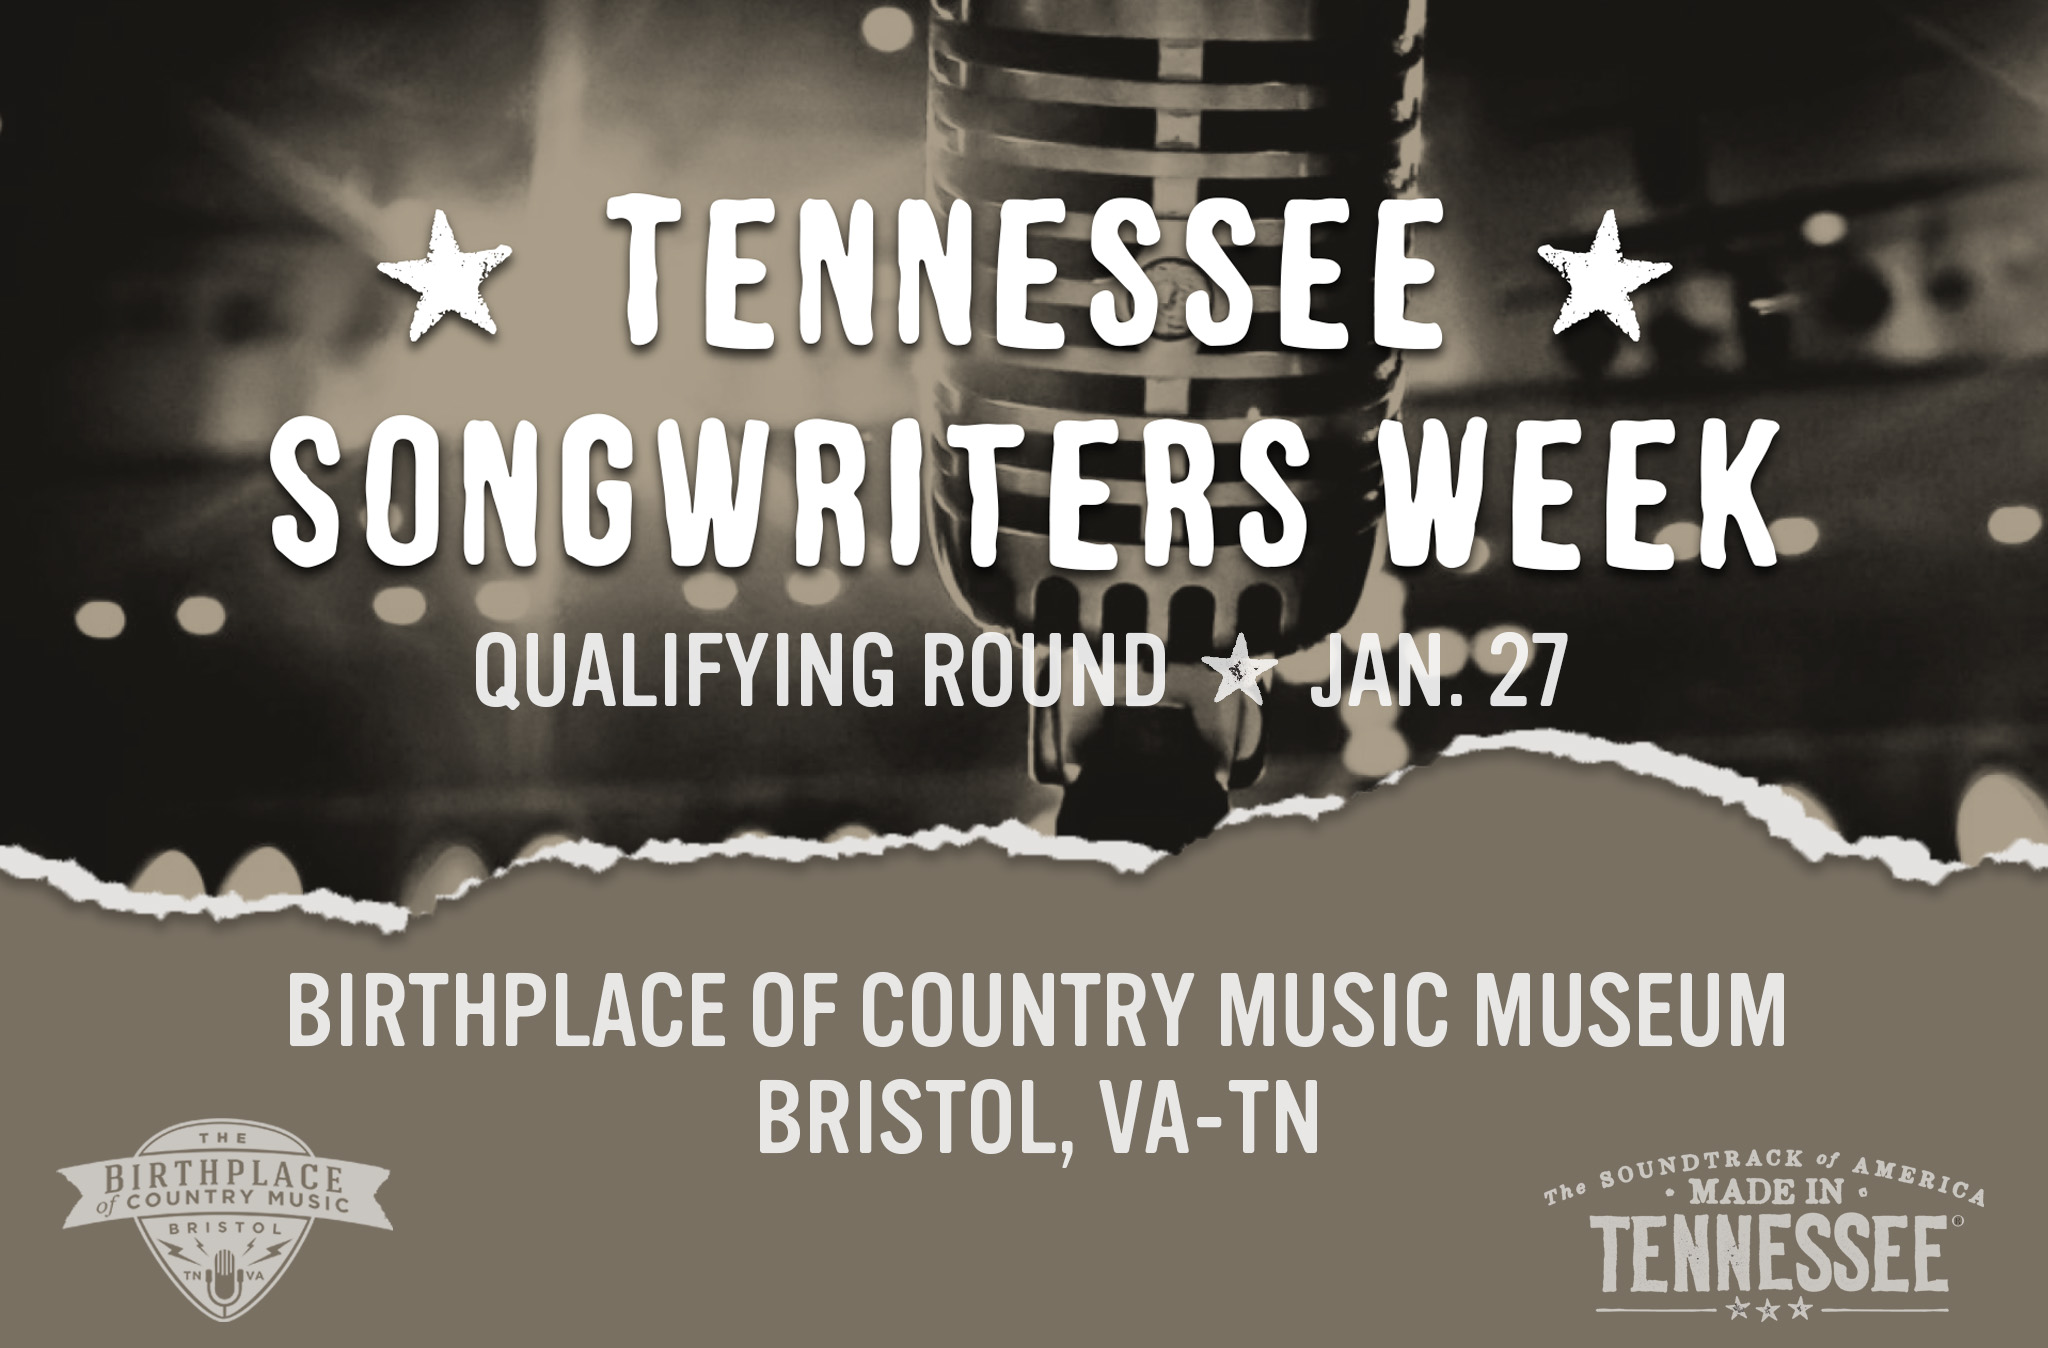 Songwriters Announced for Bristol Tennessee Songwriters Week Qualifying Round Jan. 27